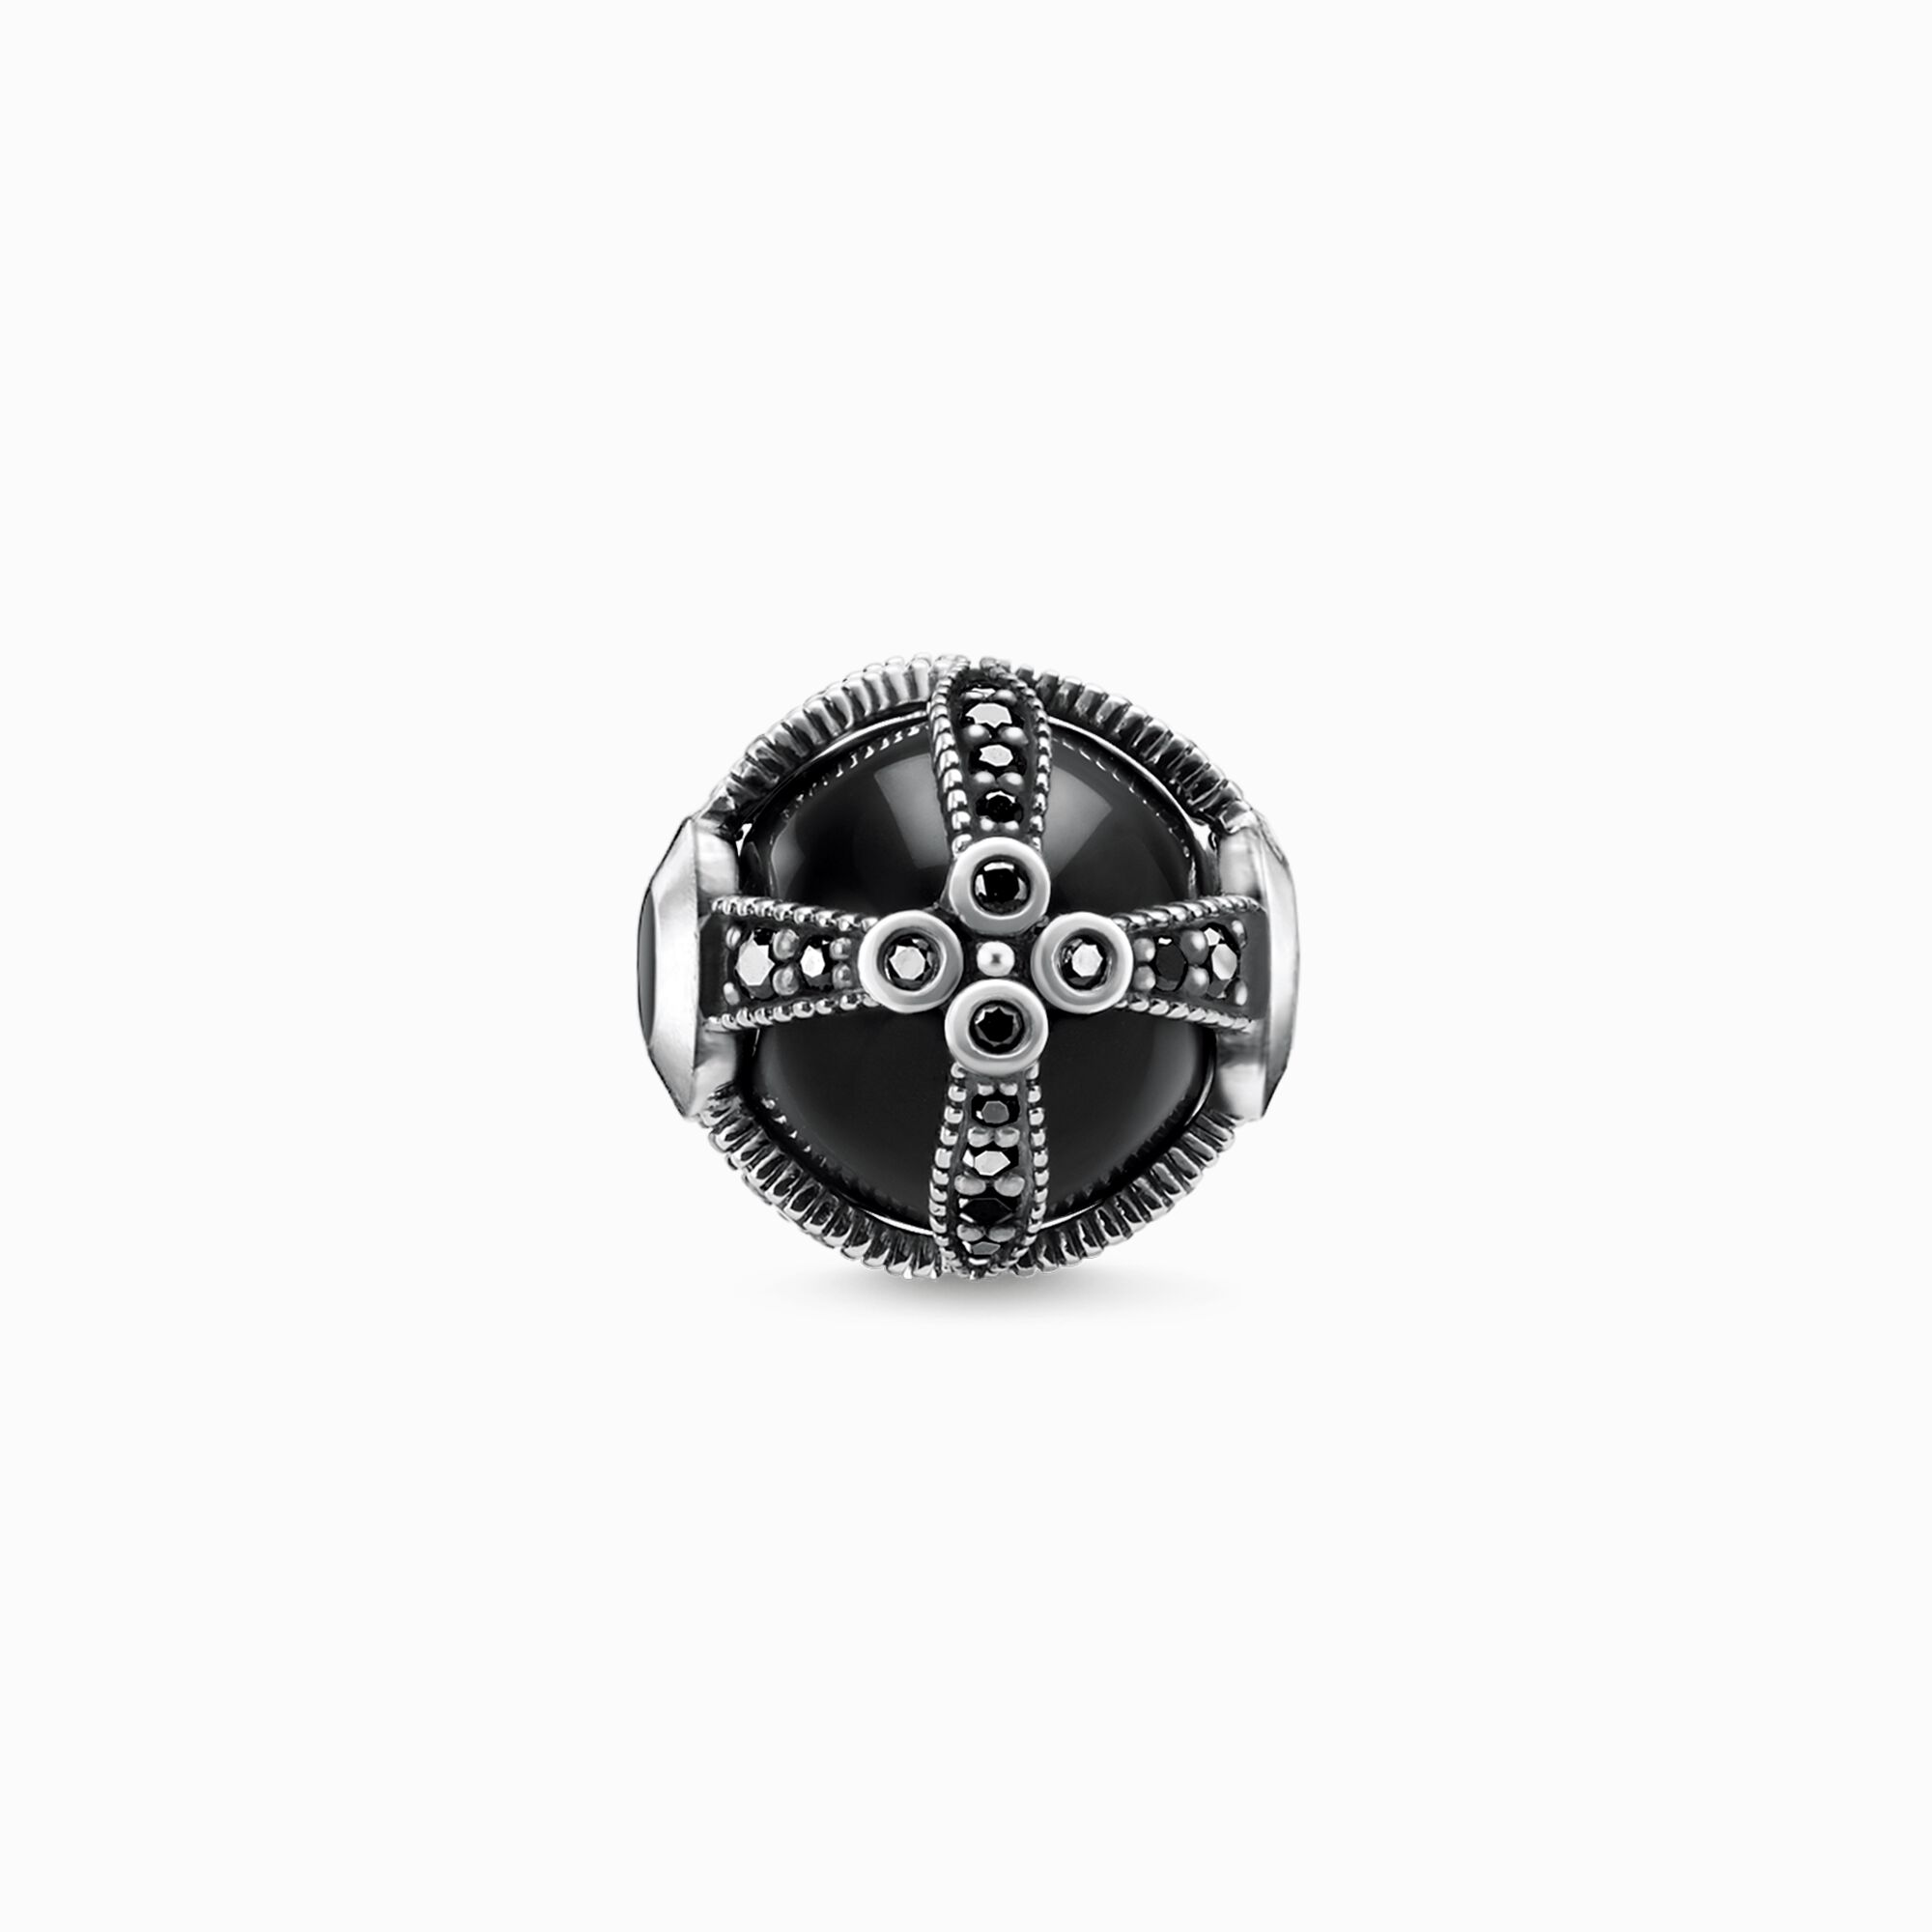 Bead Royalty Black from the Karma Beads collection in the THOMAS SABO online store